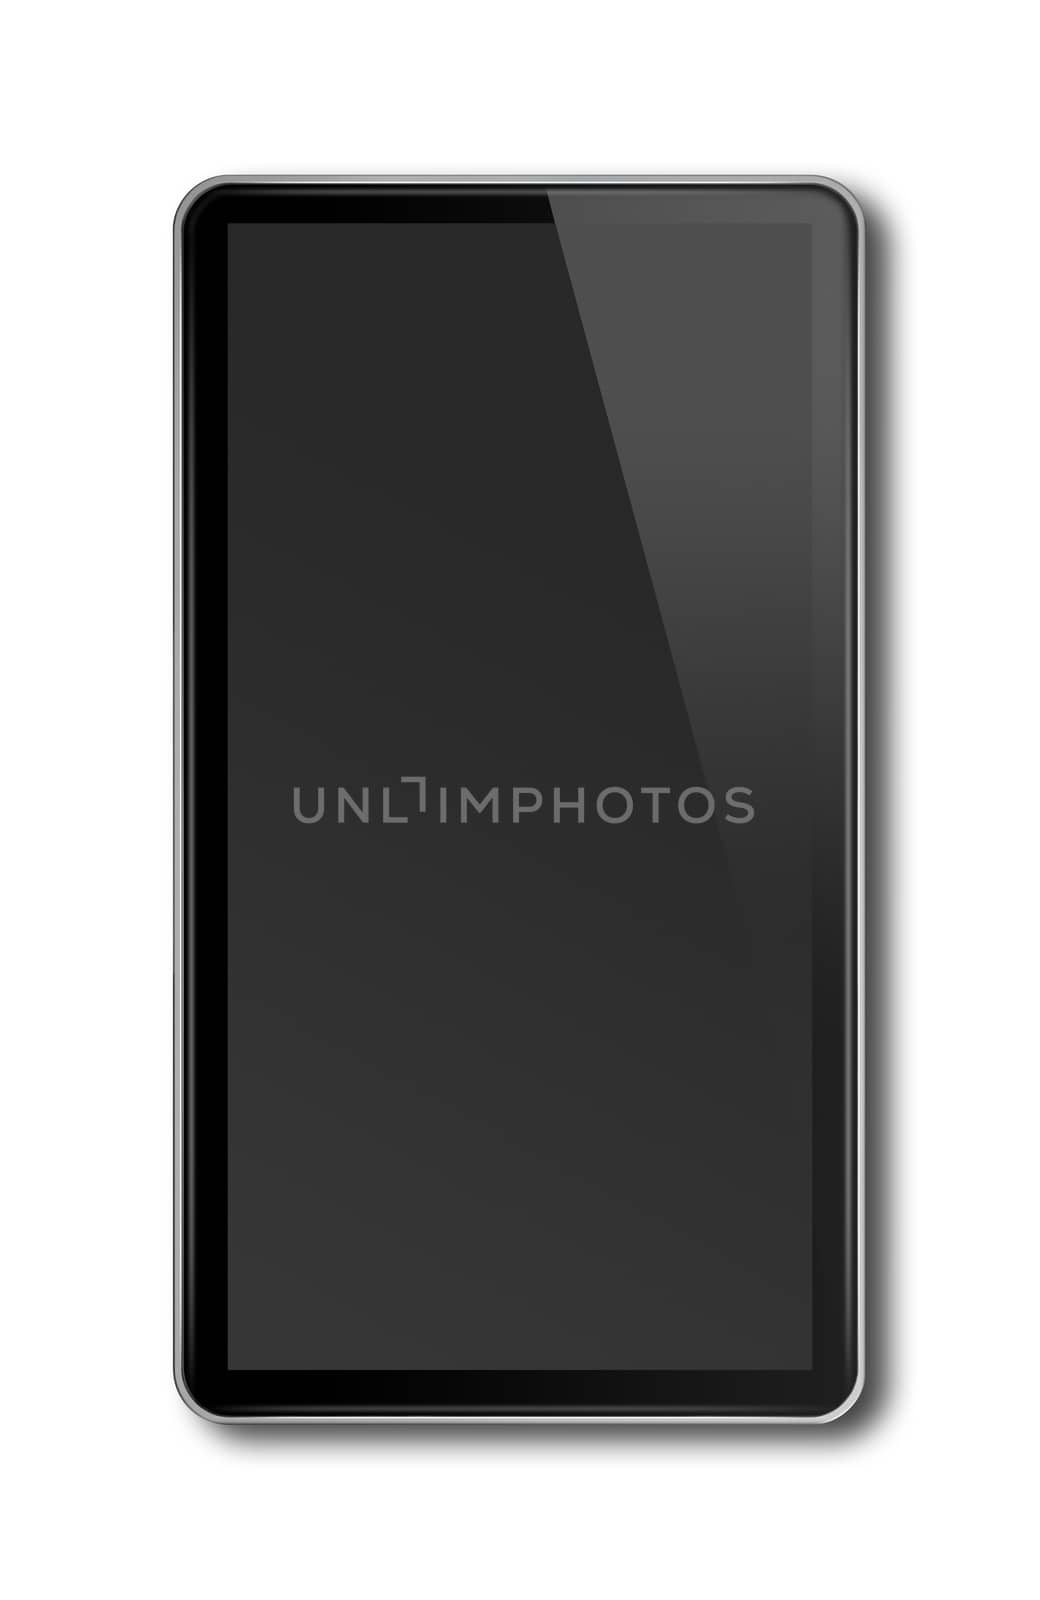 Black smartphone, digital tablet pc mockup template. Isolated on white